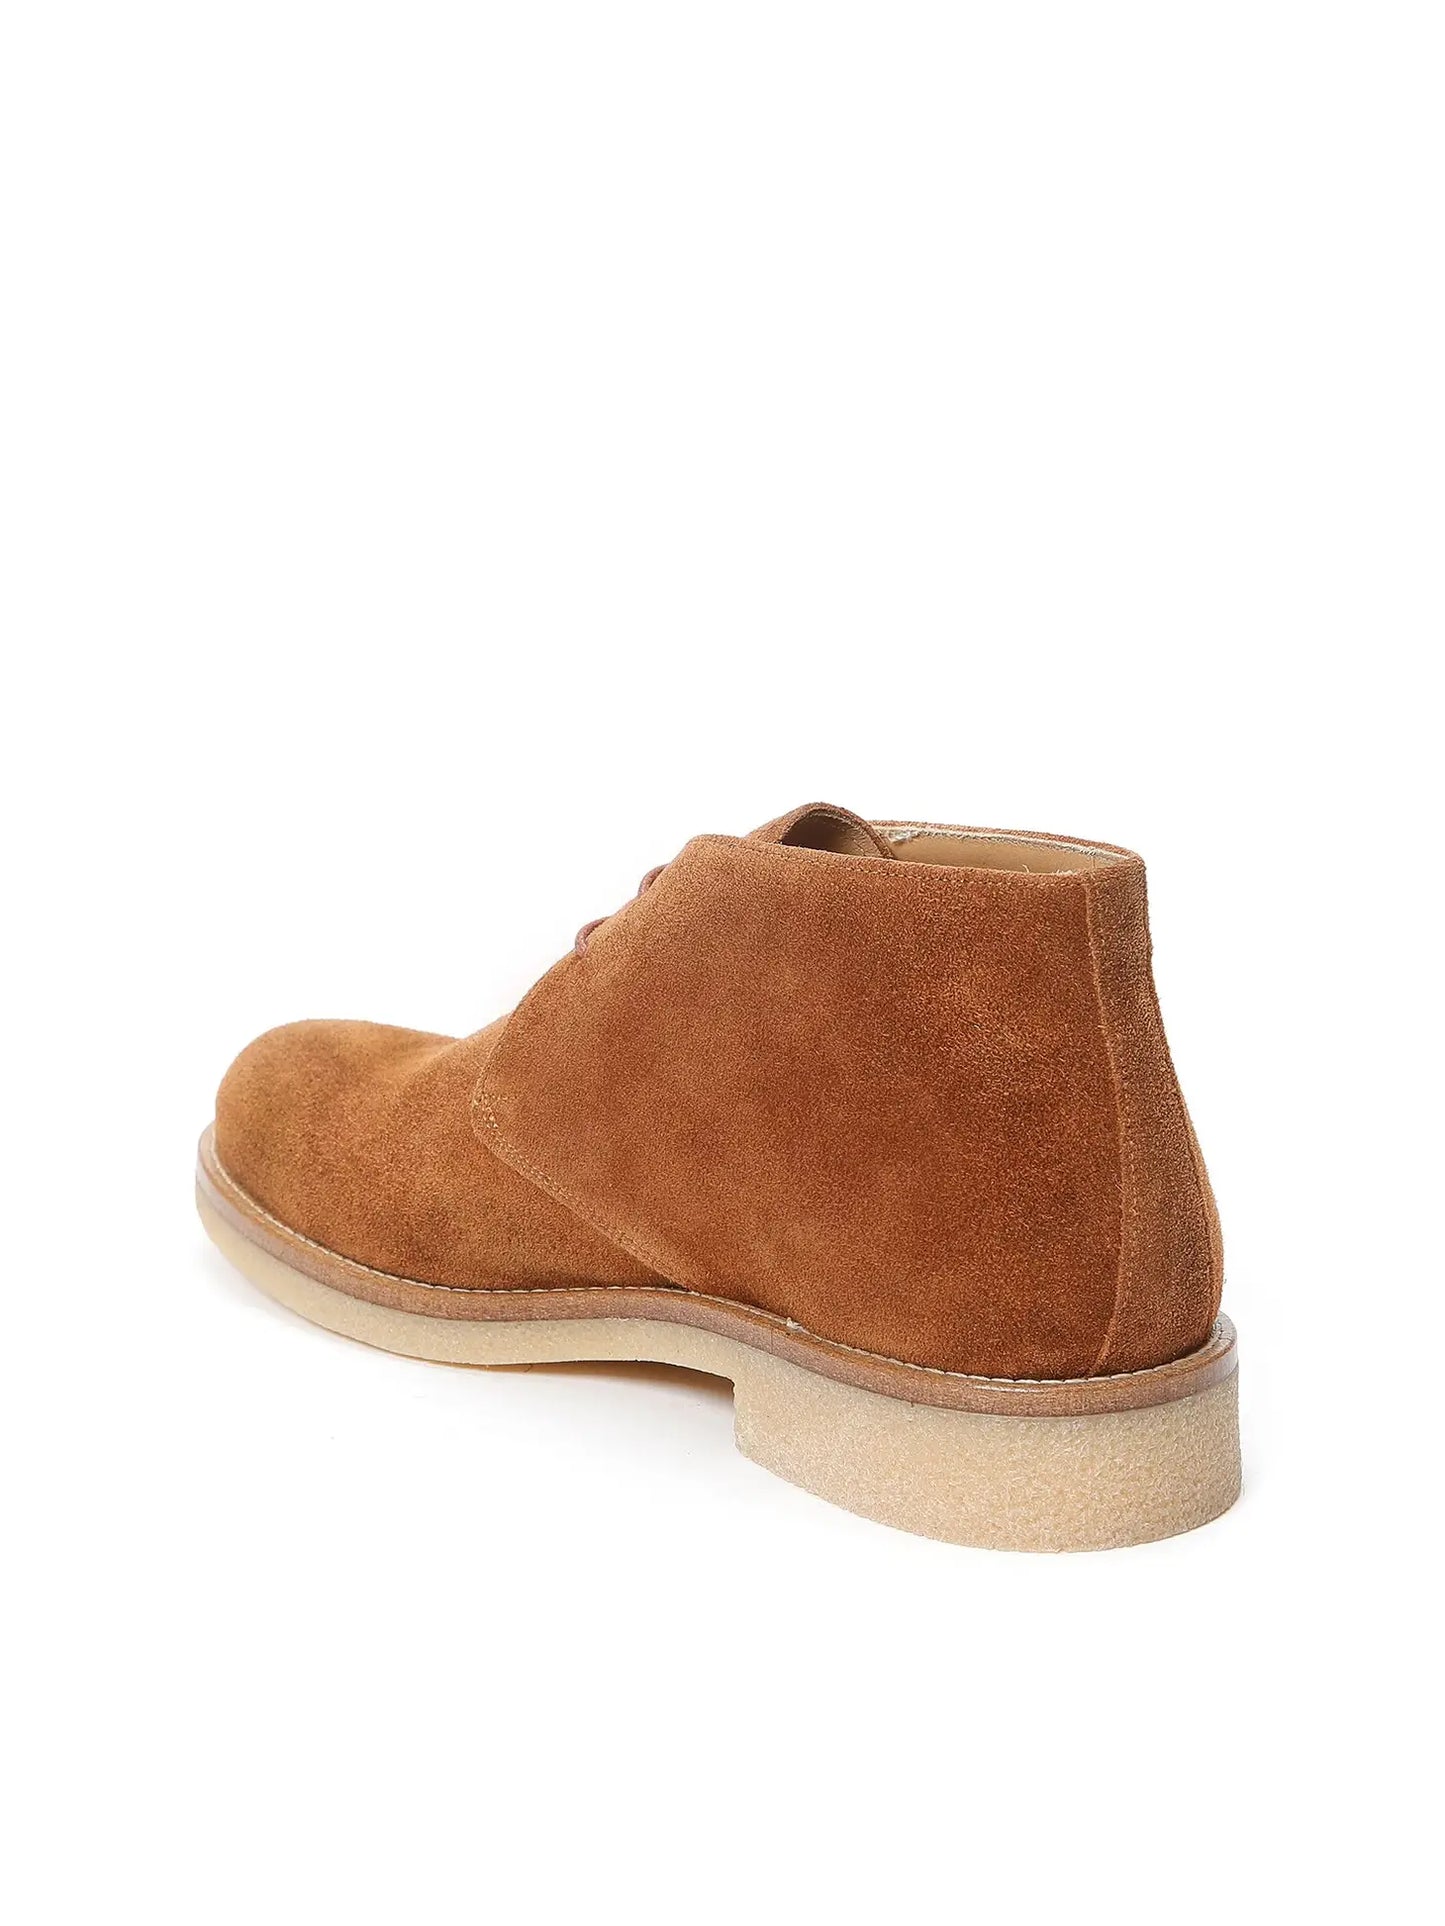 Frank Daniel FD3106-43 Brown Suede Ankle Boots